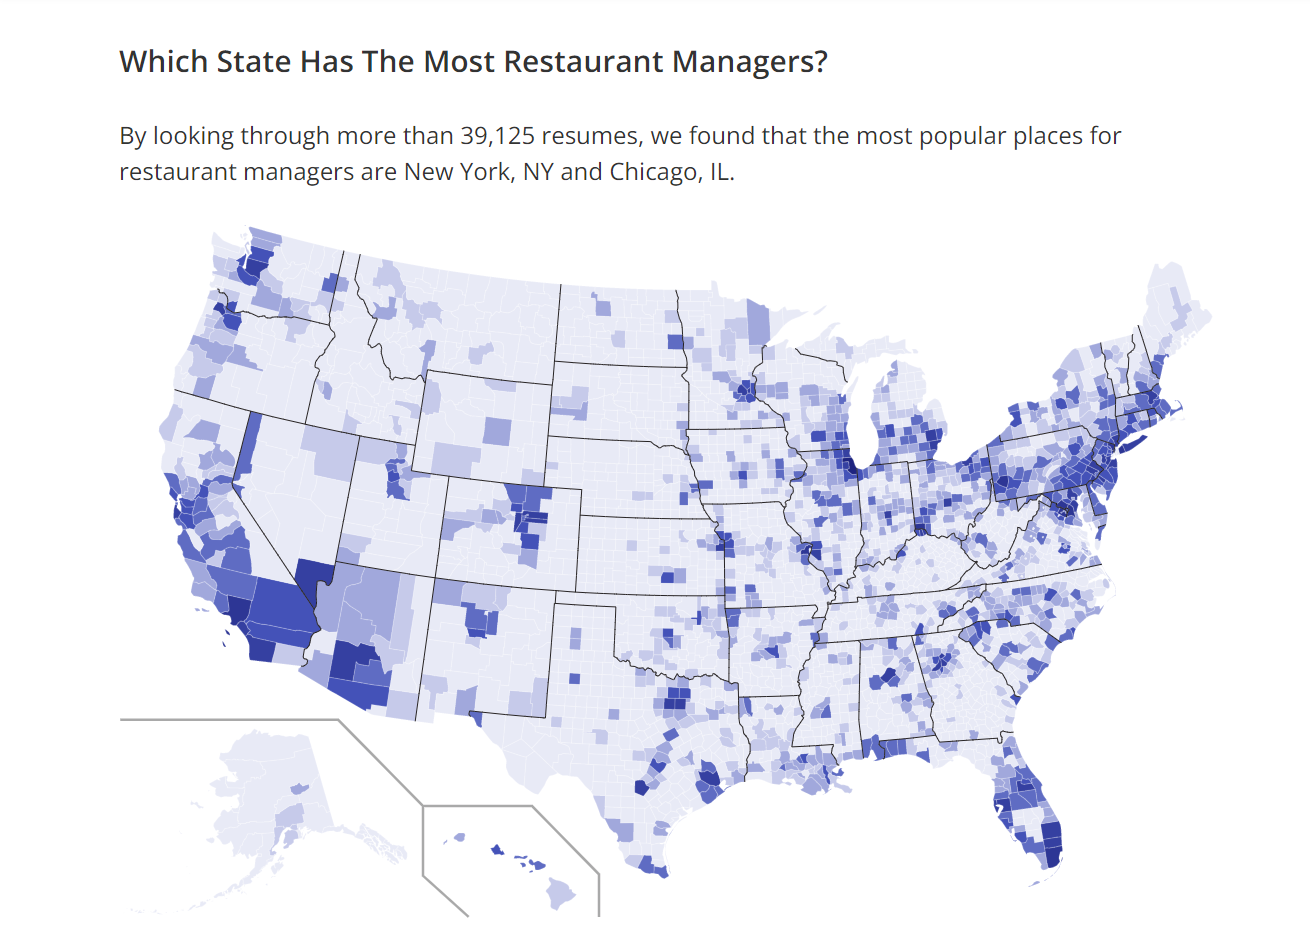 Restaurant Manager Buyer Persona Location